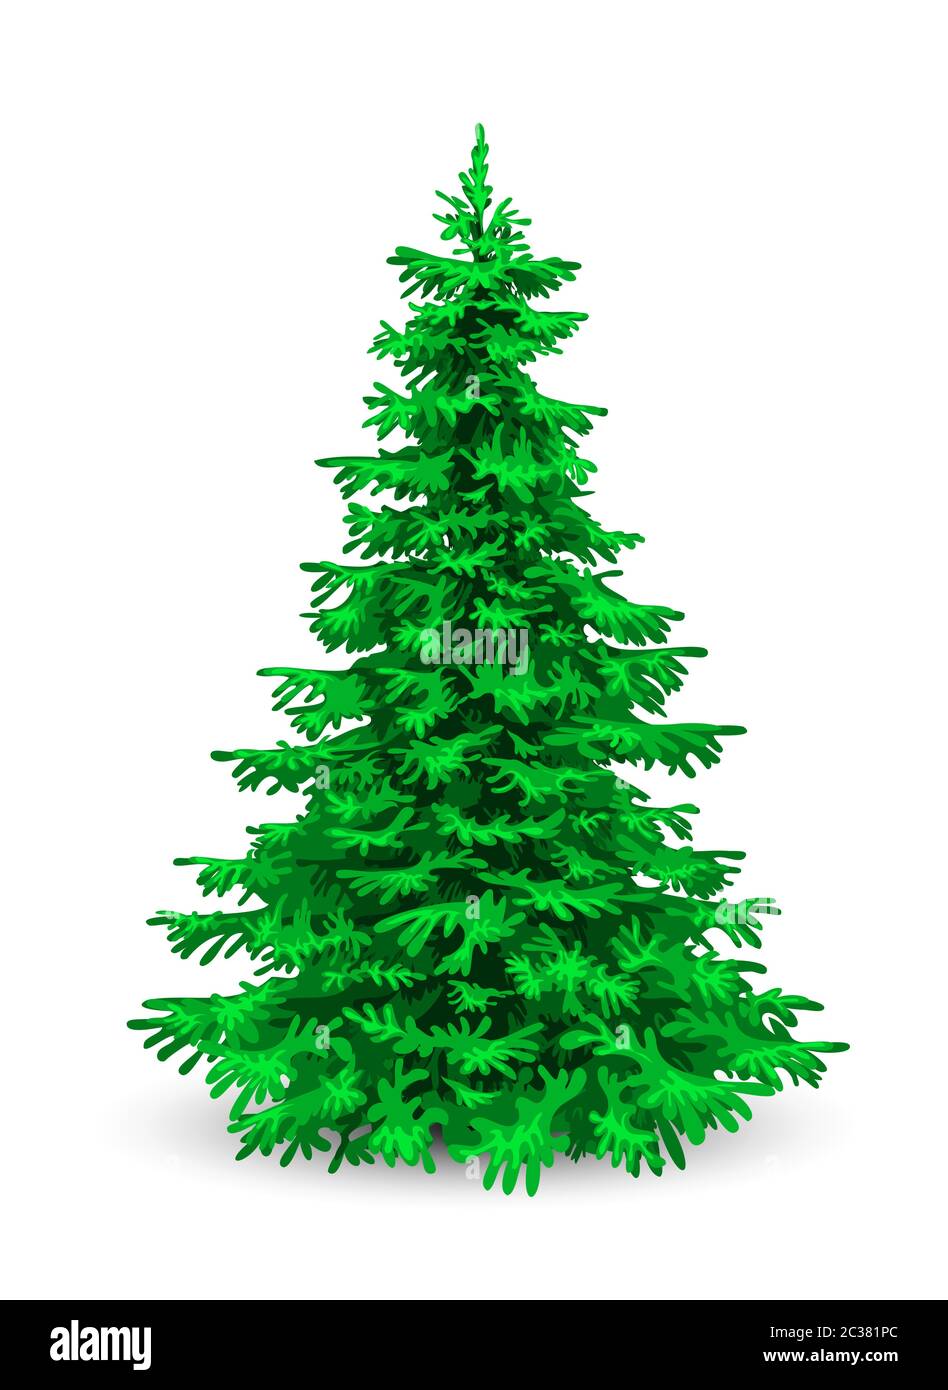 Christmas forest Cut Out Stock Images & Pictures - Page 2 - Alamy